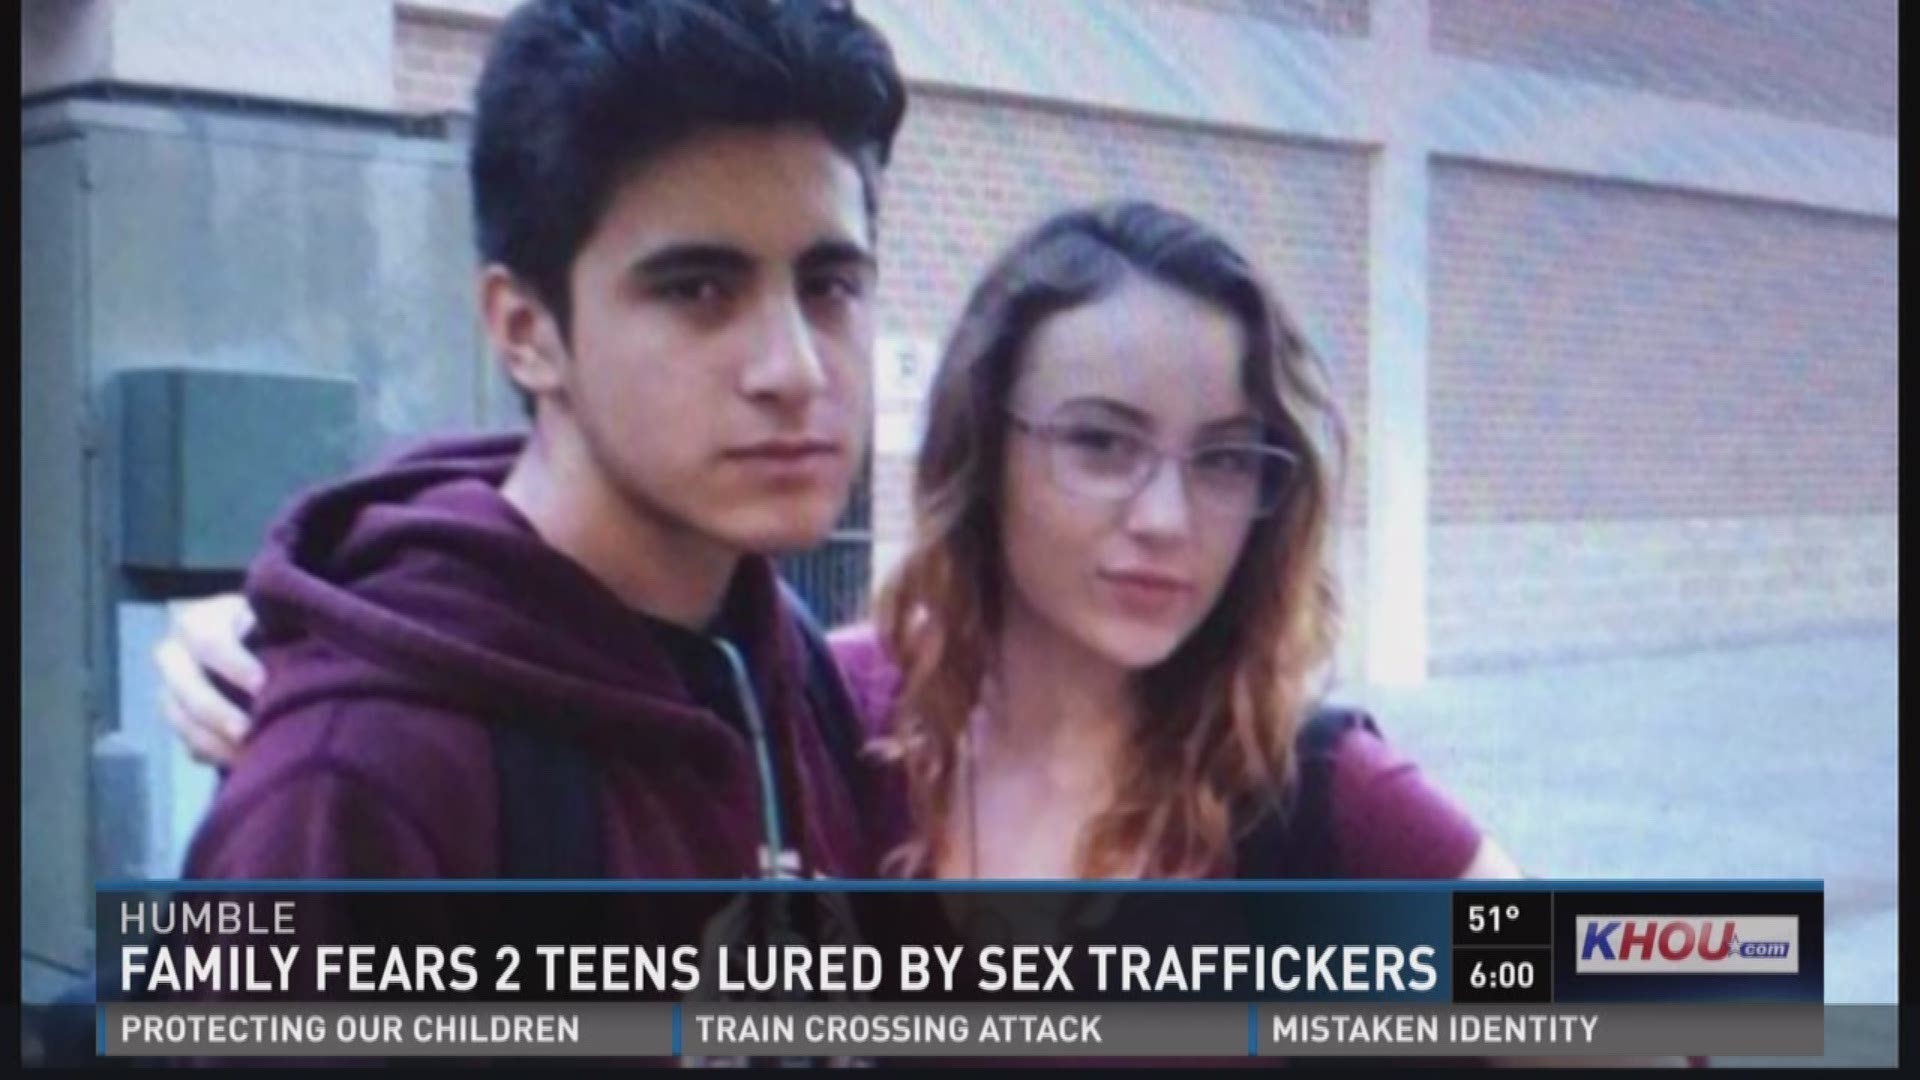 Sex trafficking experts say they believe two missing Humble High School teens, a 14 year old and a 15 year old, may have been lured away from home by sex traffickers.